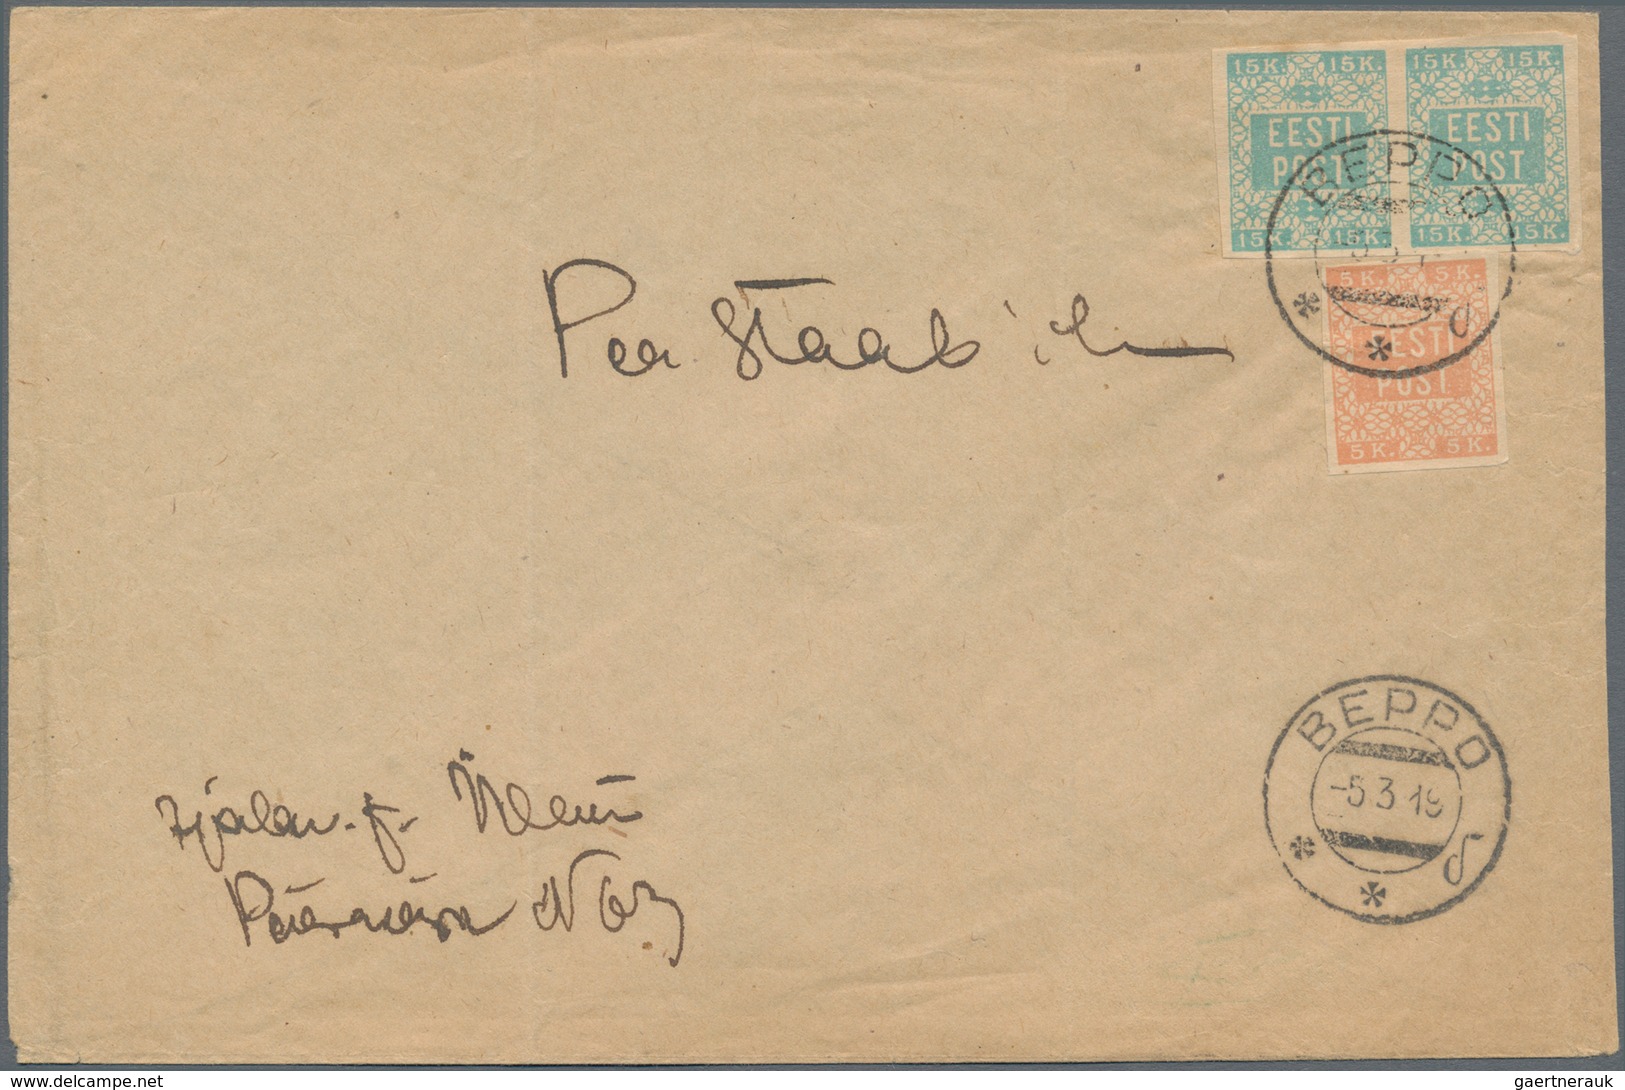 Estland - Stempel: 1918/1919, 4 Covers And Cards With Provisional Postmark LIHULA, NUIA (2) And WERR - Estland